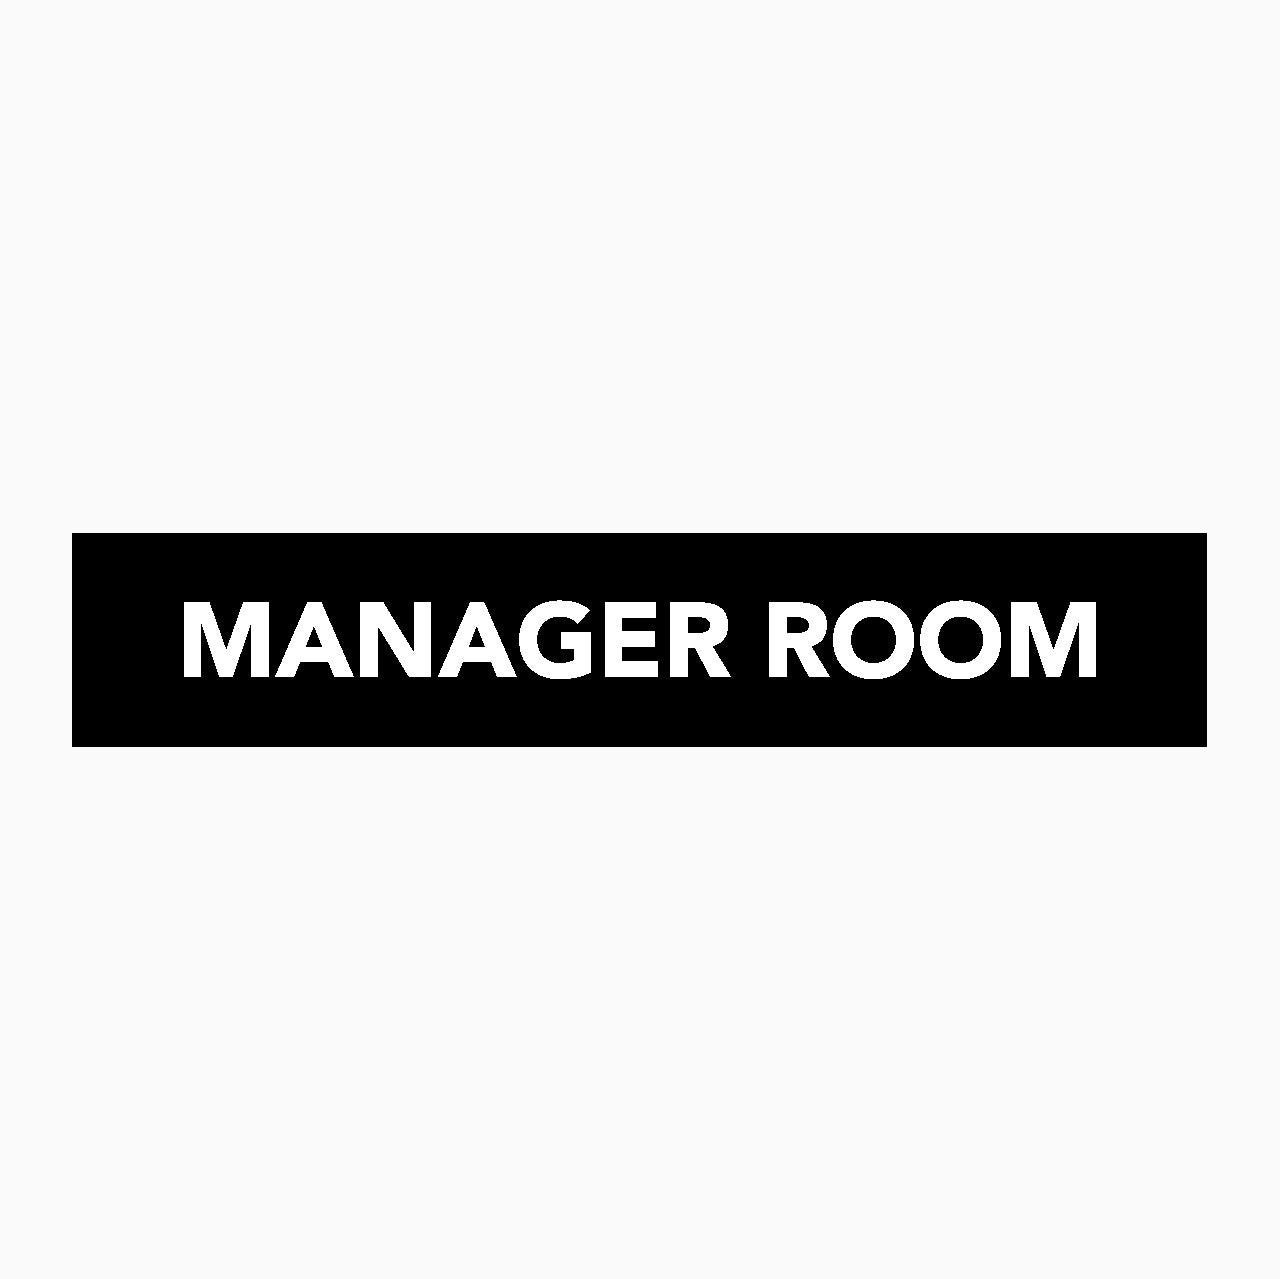 MANAGER ROOM SIGN